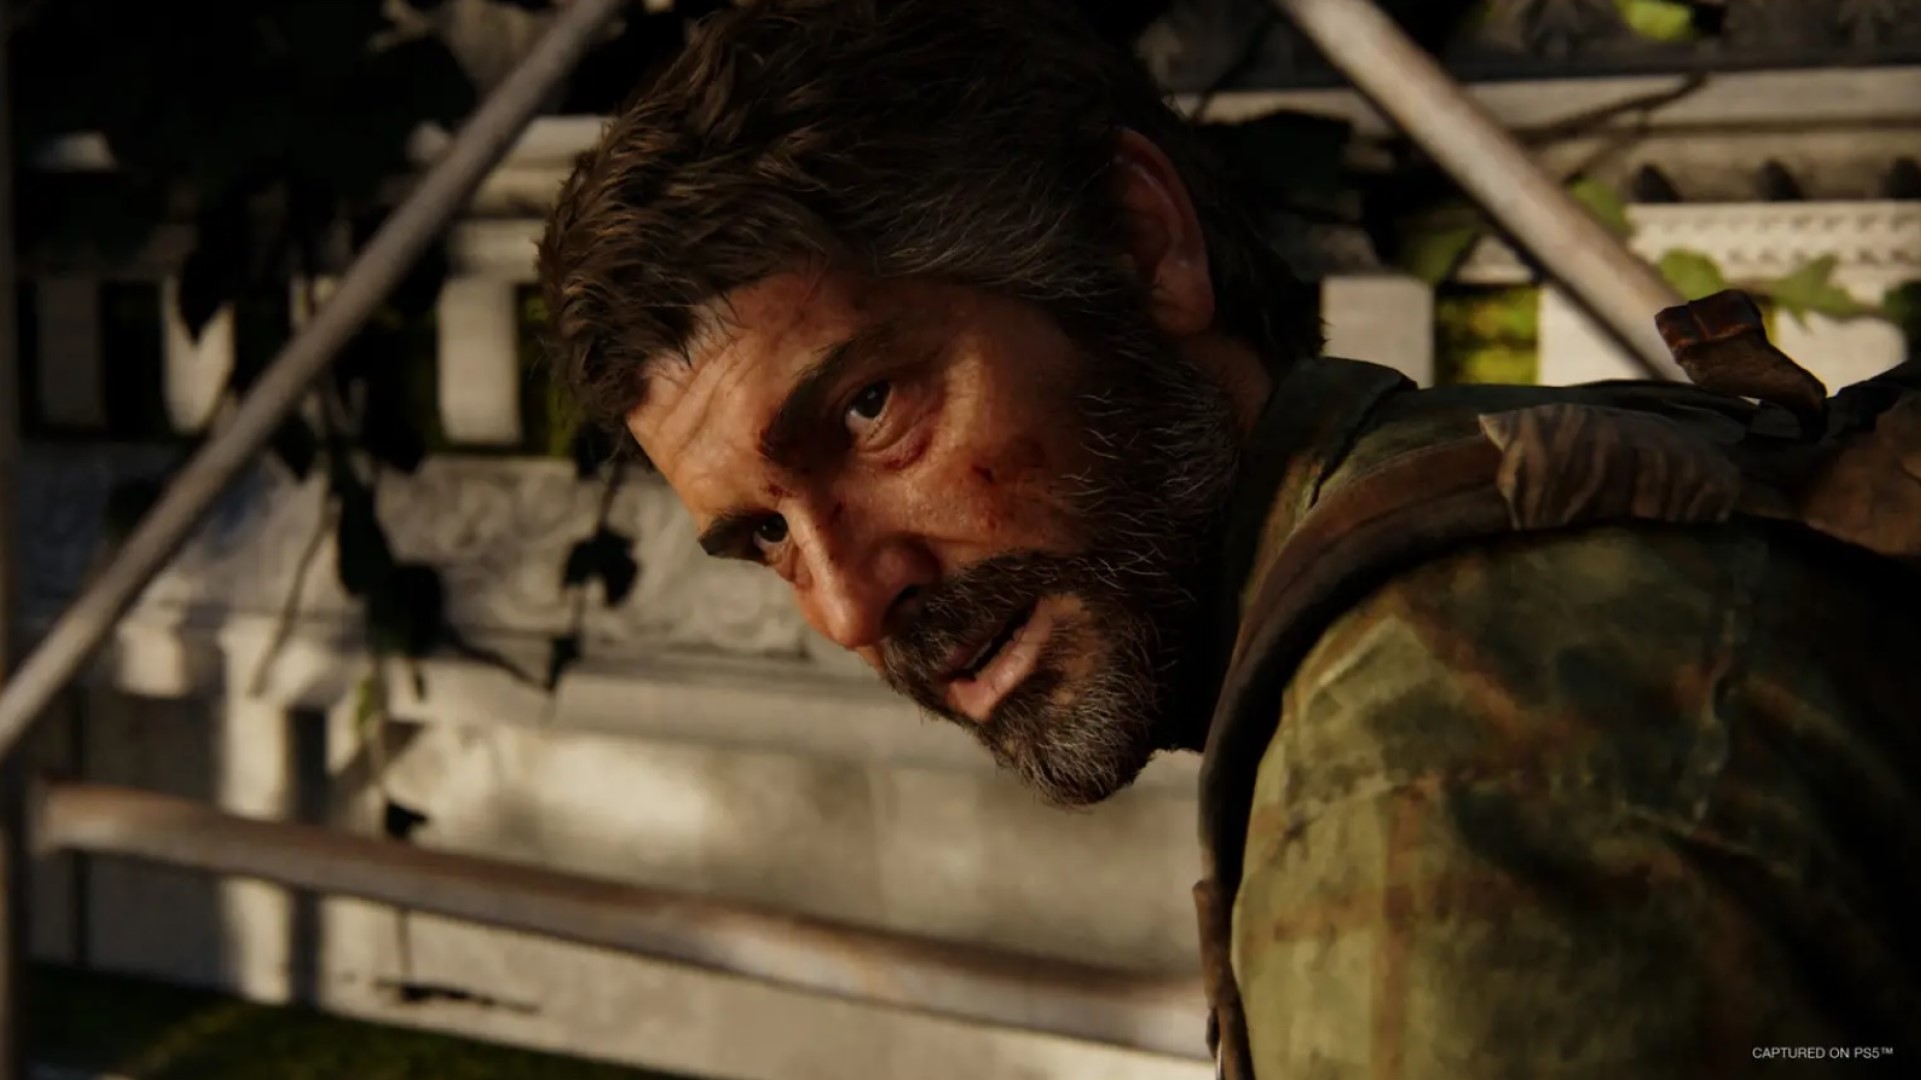 The Last Of Us Part 1 PC port is being review bombed